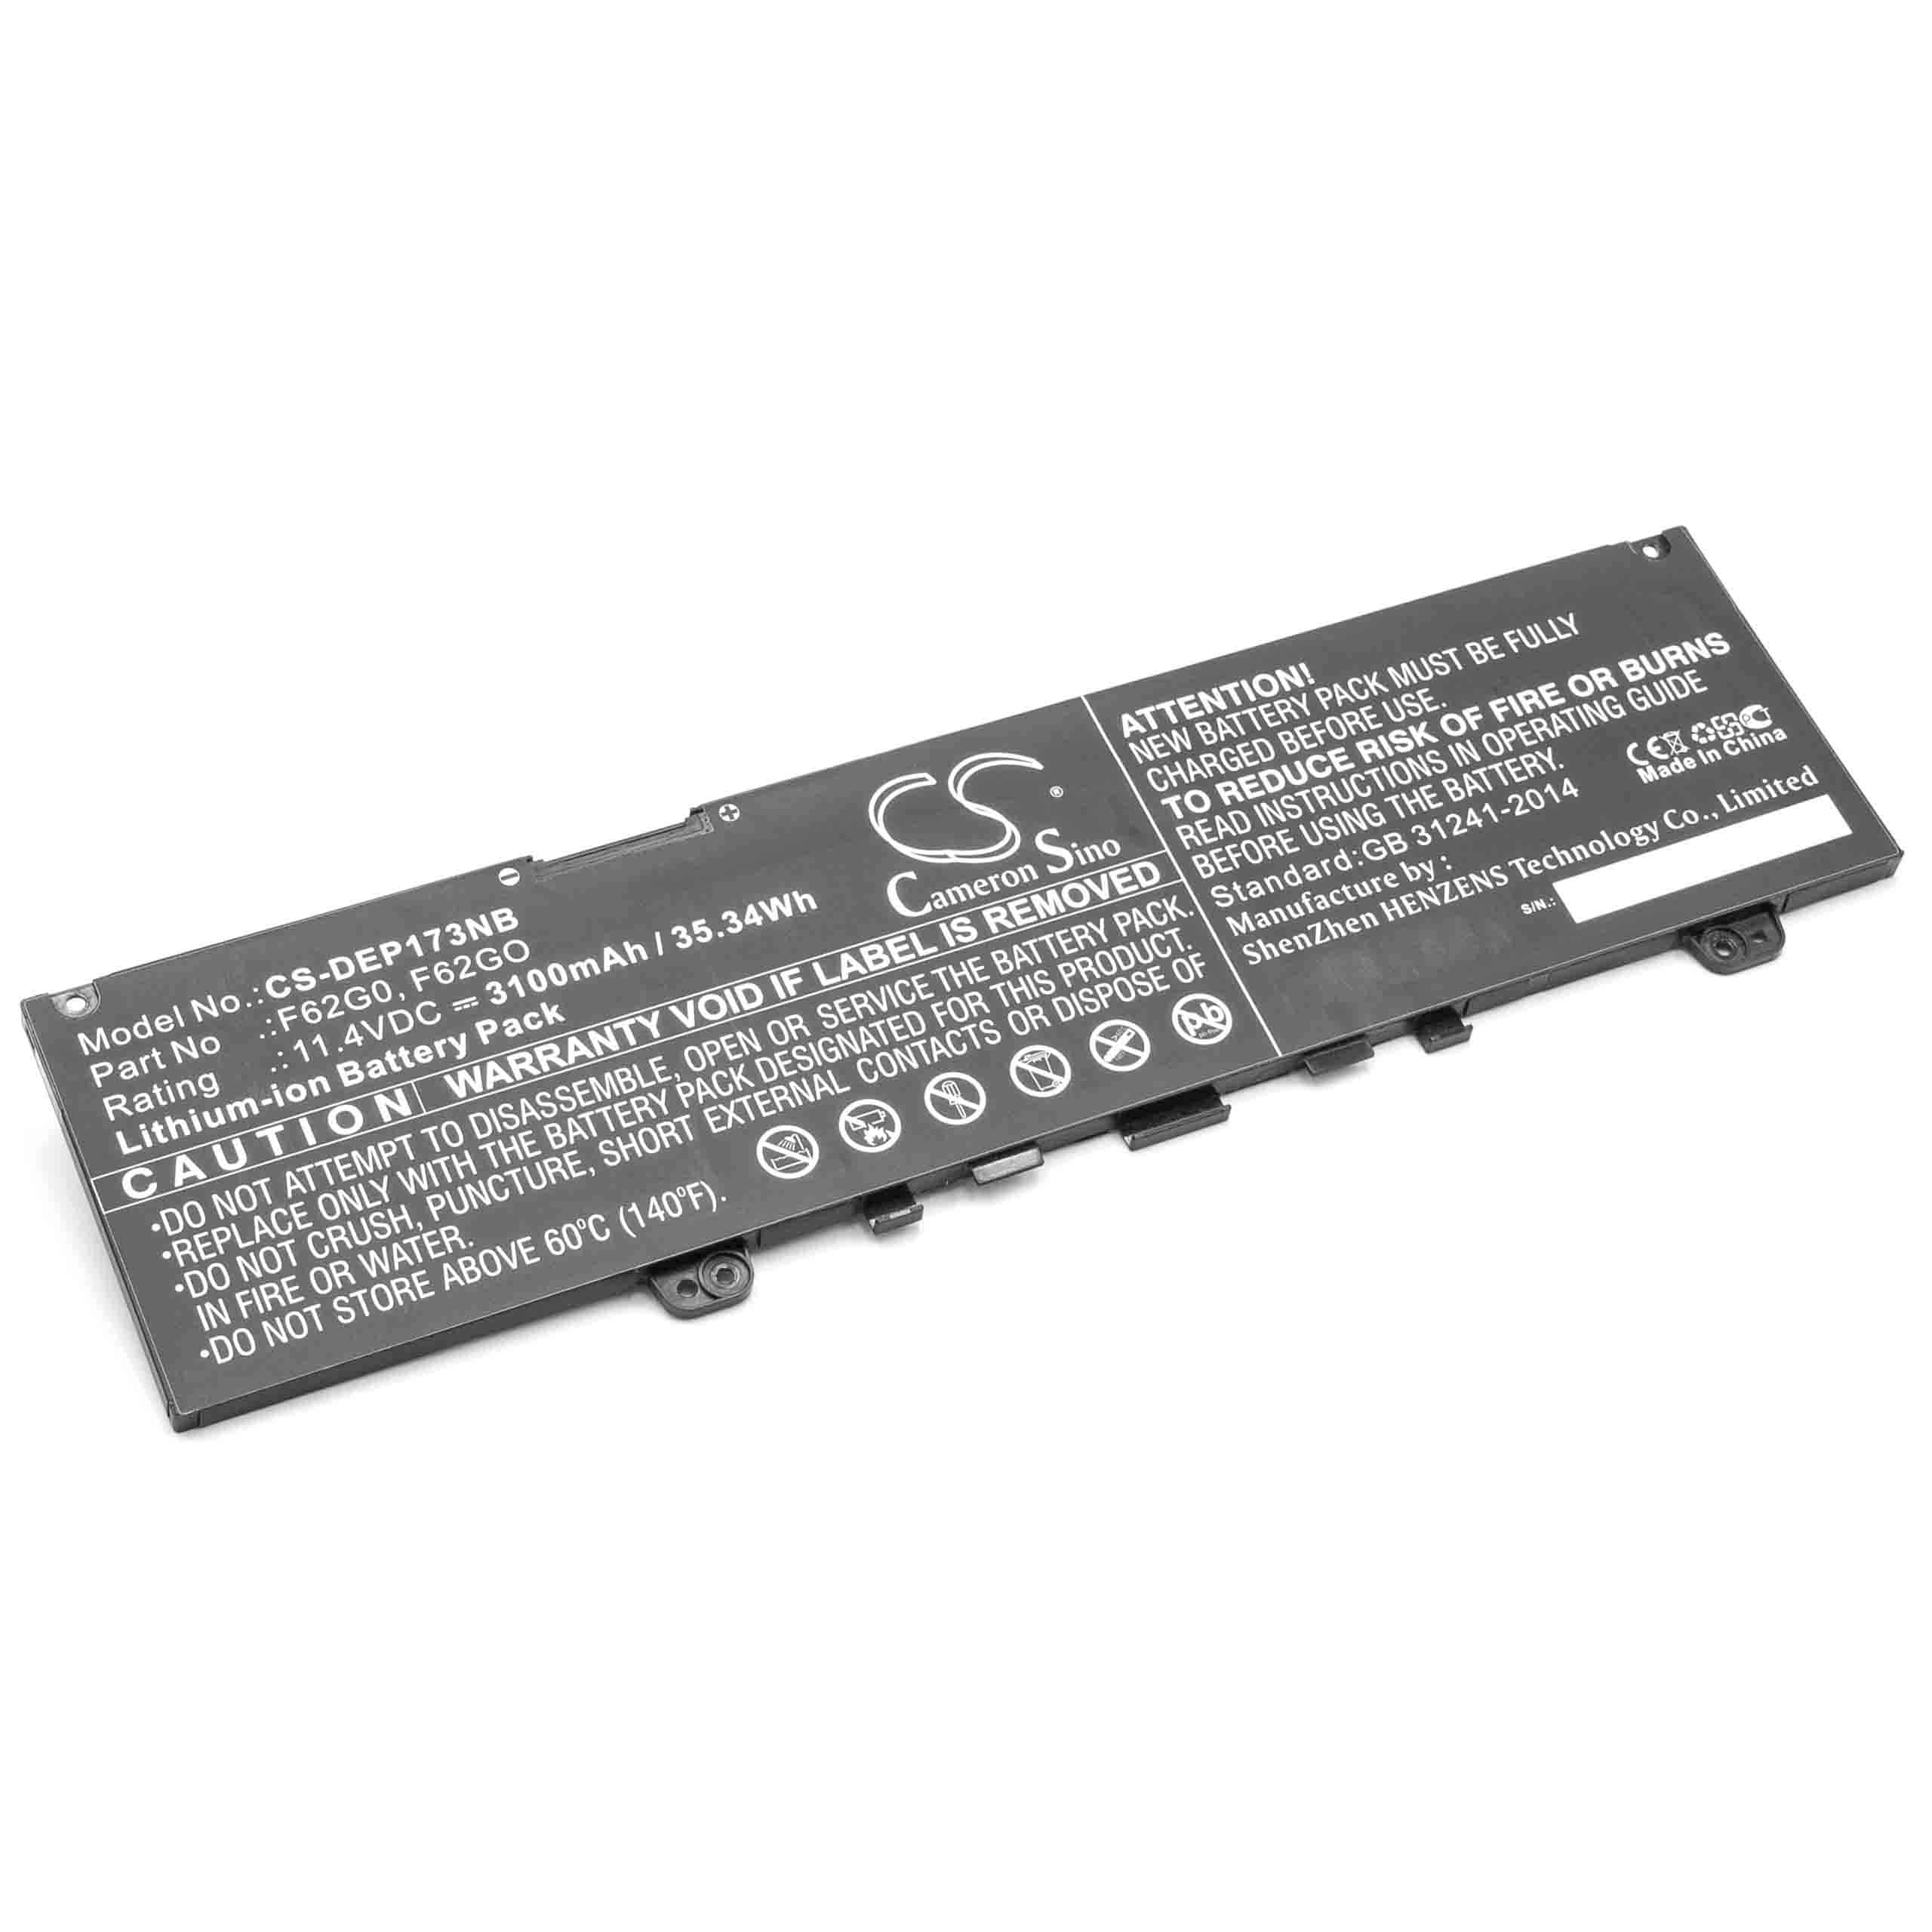 Notebook Battery Replacement for Dell 39DY5, F62GO, F62G0, P83G, 0RPJC3, 039DY5 - 3100mAh 11.4V Li-Ion, black